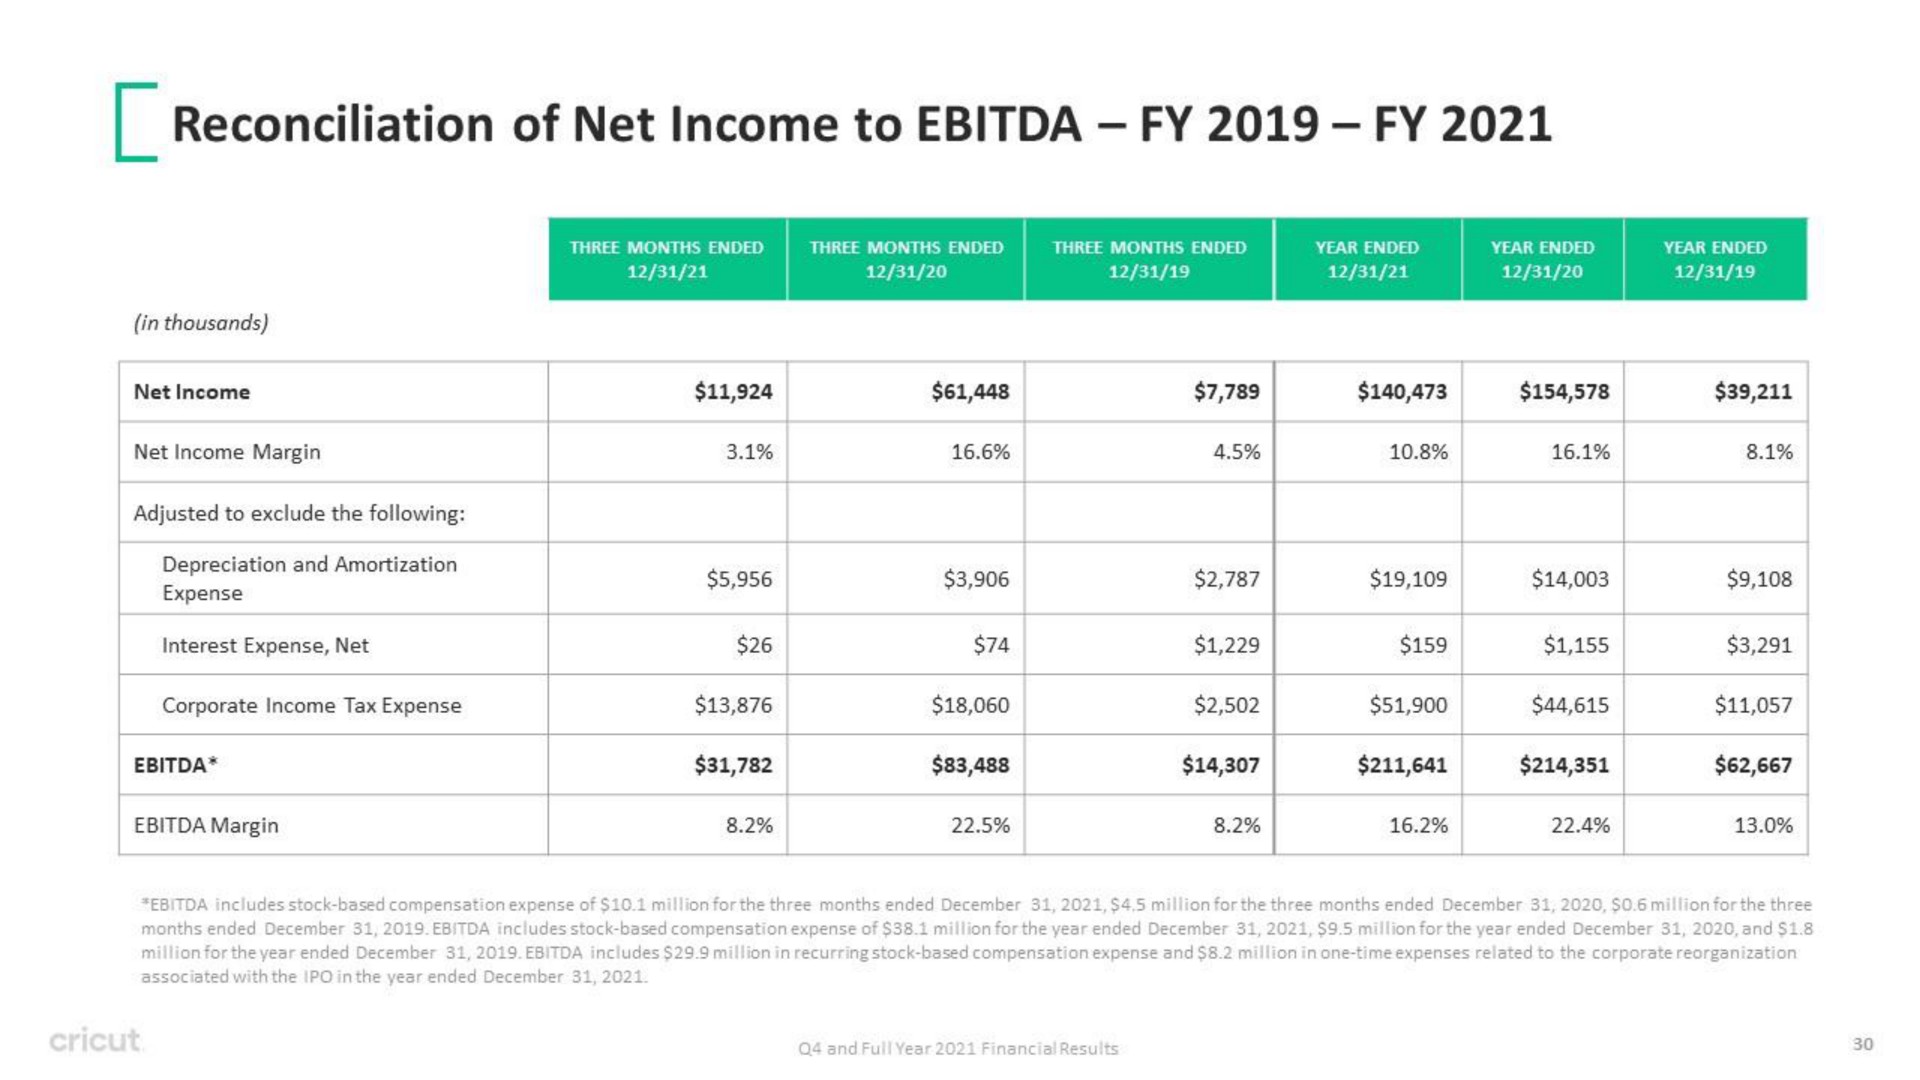 reconciliation of net income to | Circut